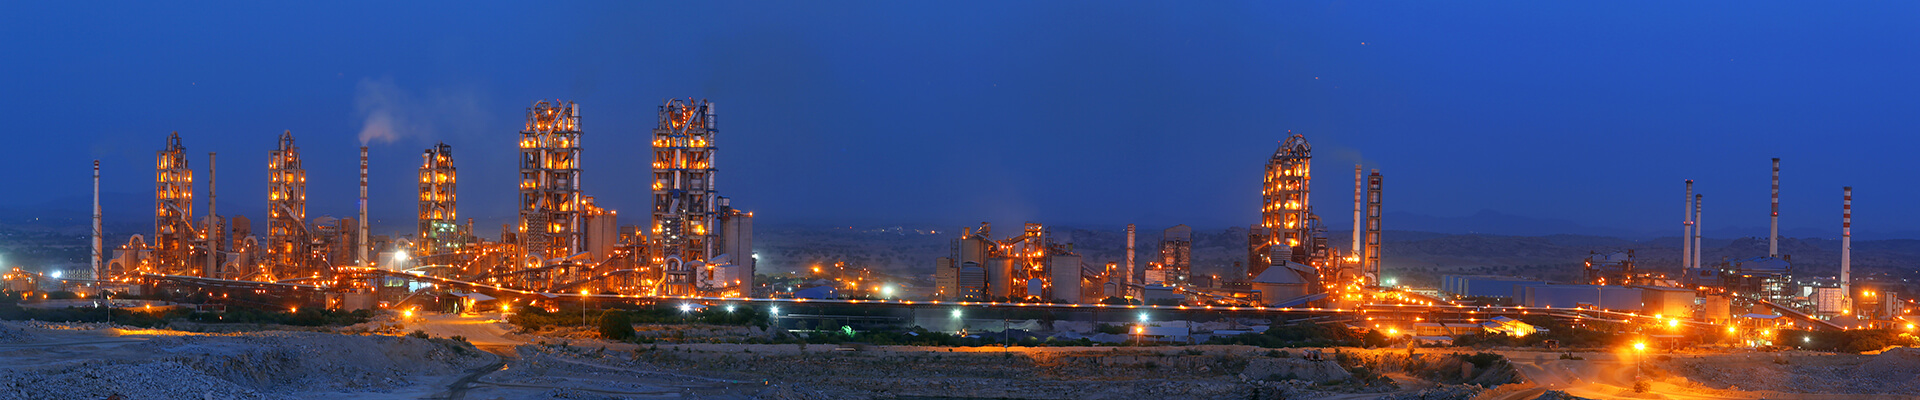 Oil Refinery - Invest Rajasthan